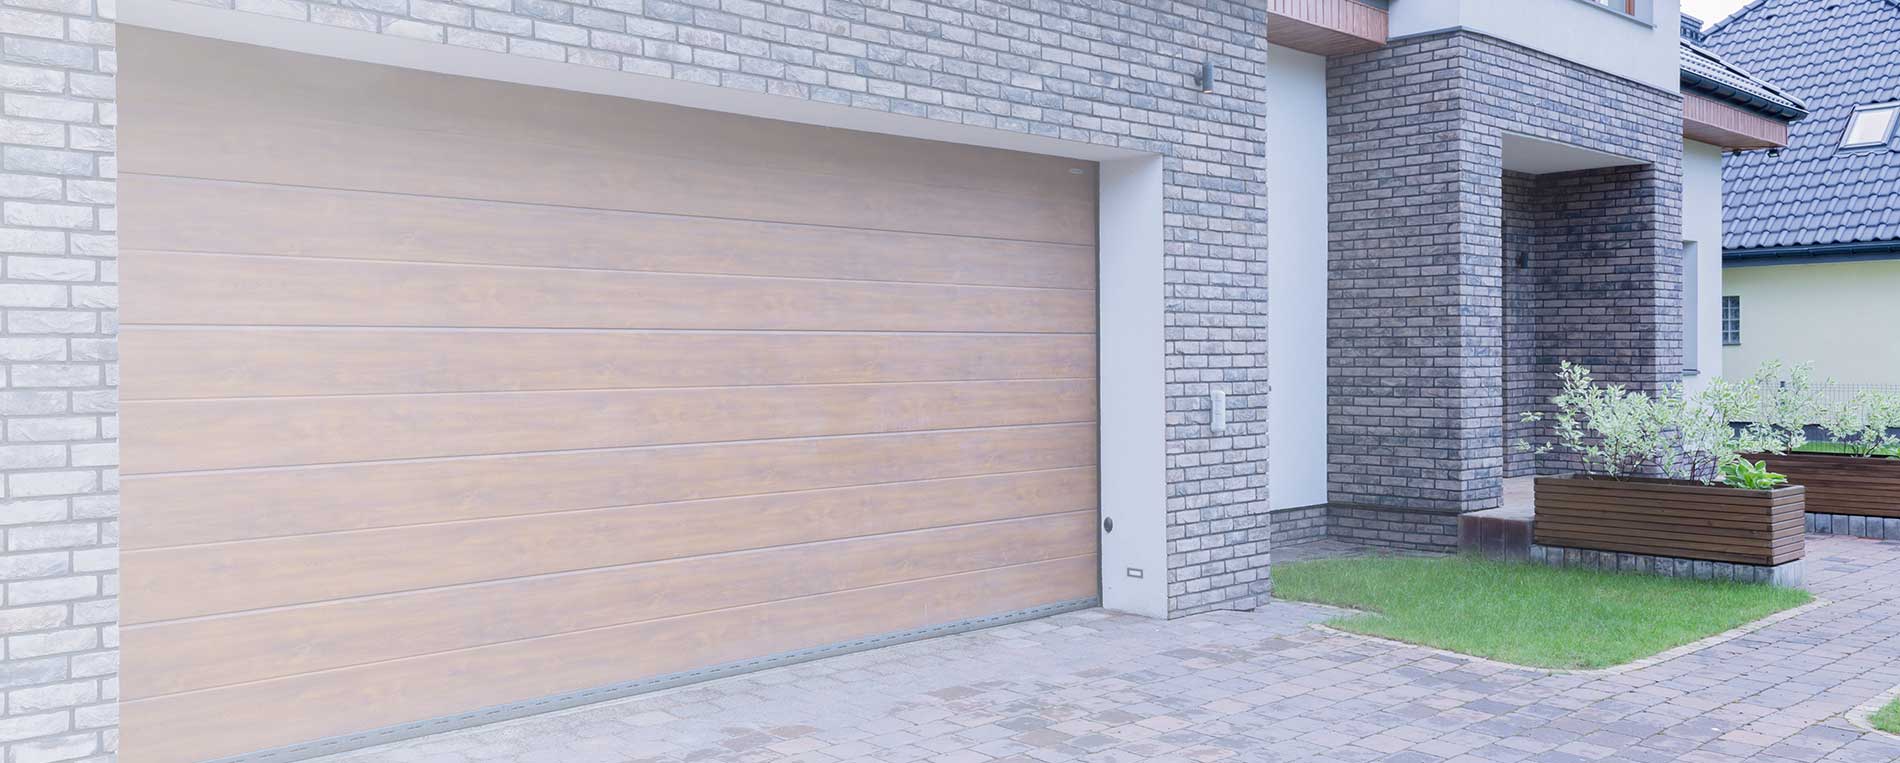 What Are The Benefits Of Having A Steel Garage Door Installed At Home?